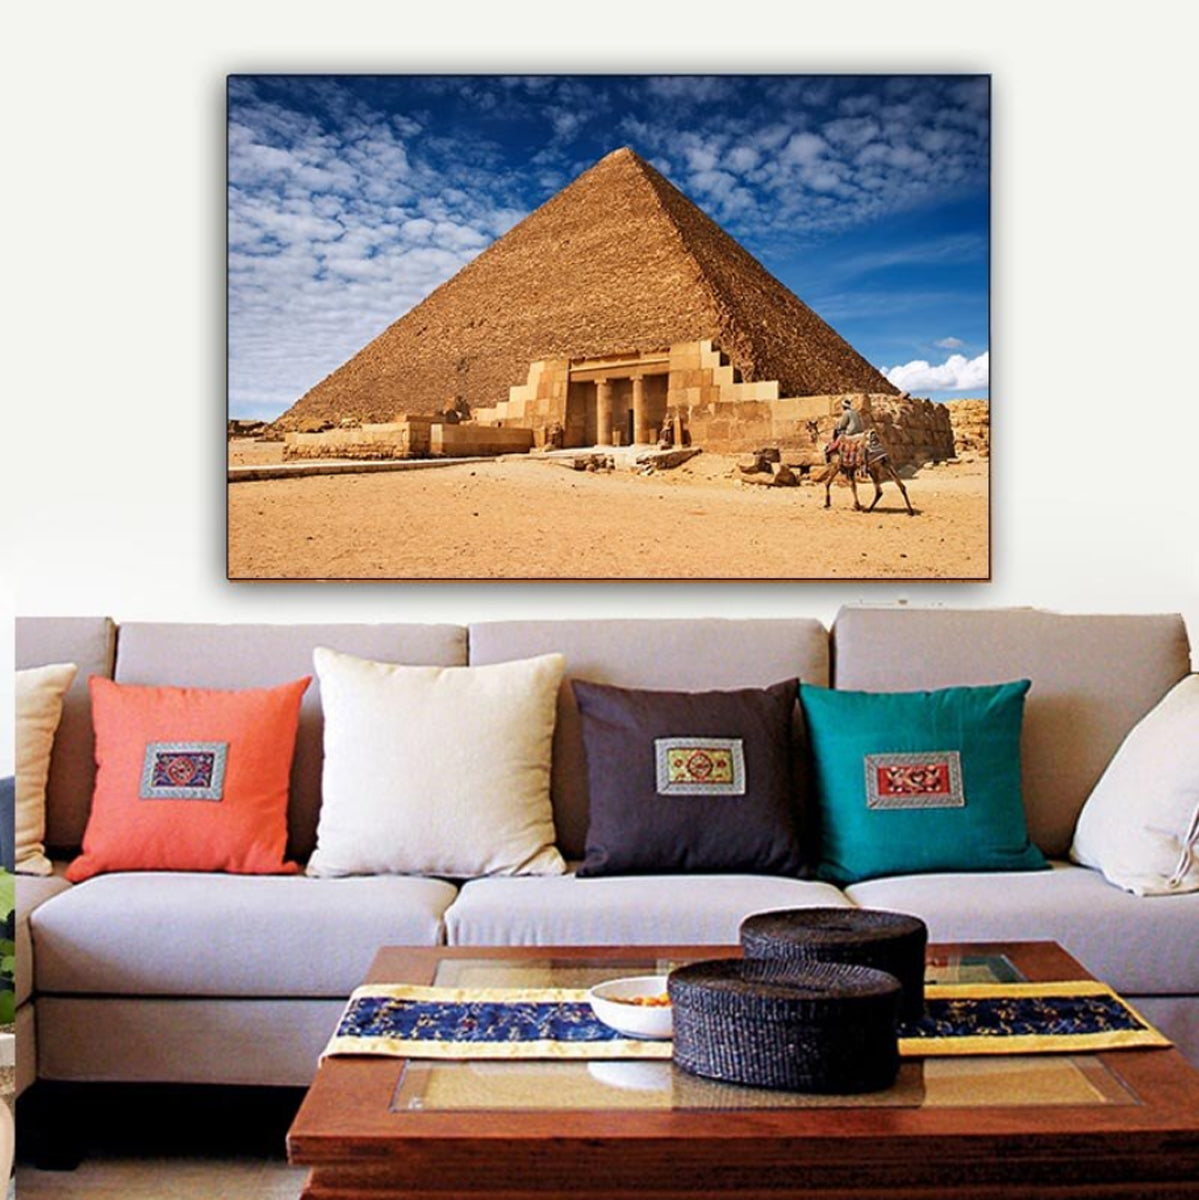 TPFLiving Poster Canvas / Egyptian Sphin Landscapes, Traumpreisfabrik Desert, – Pyramids